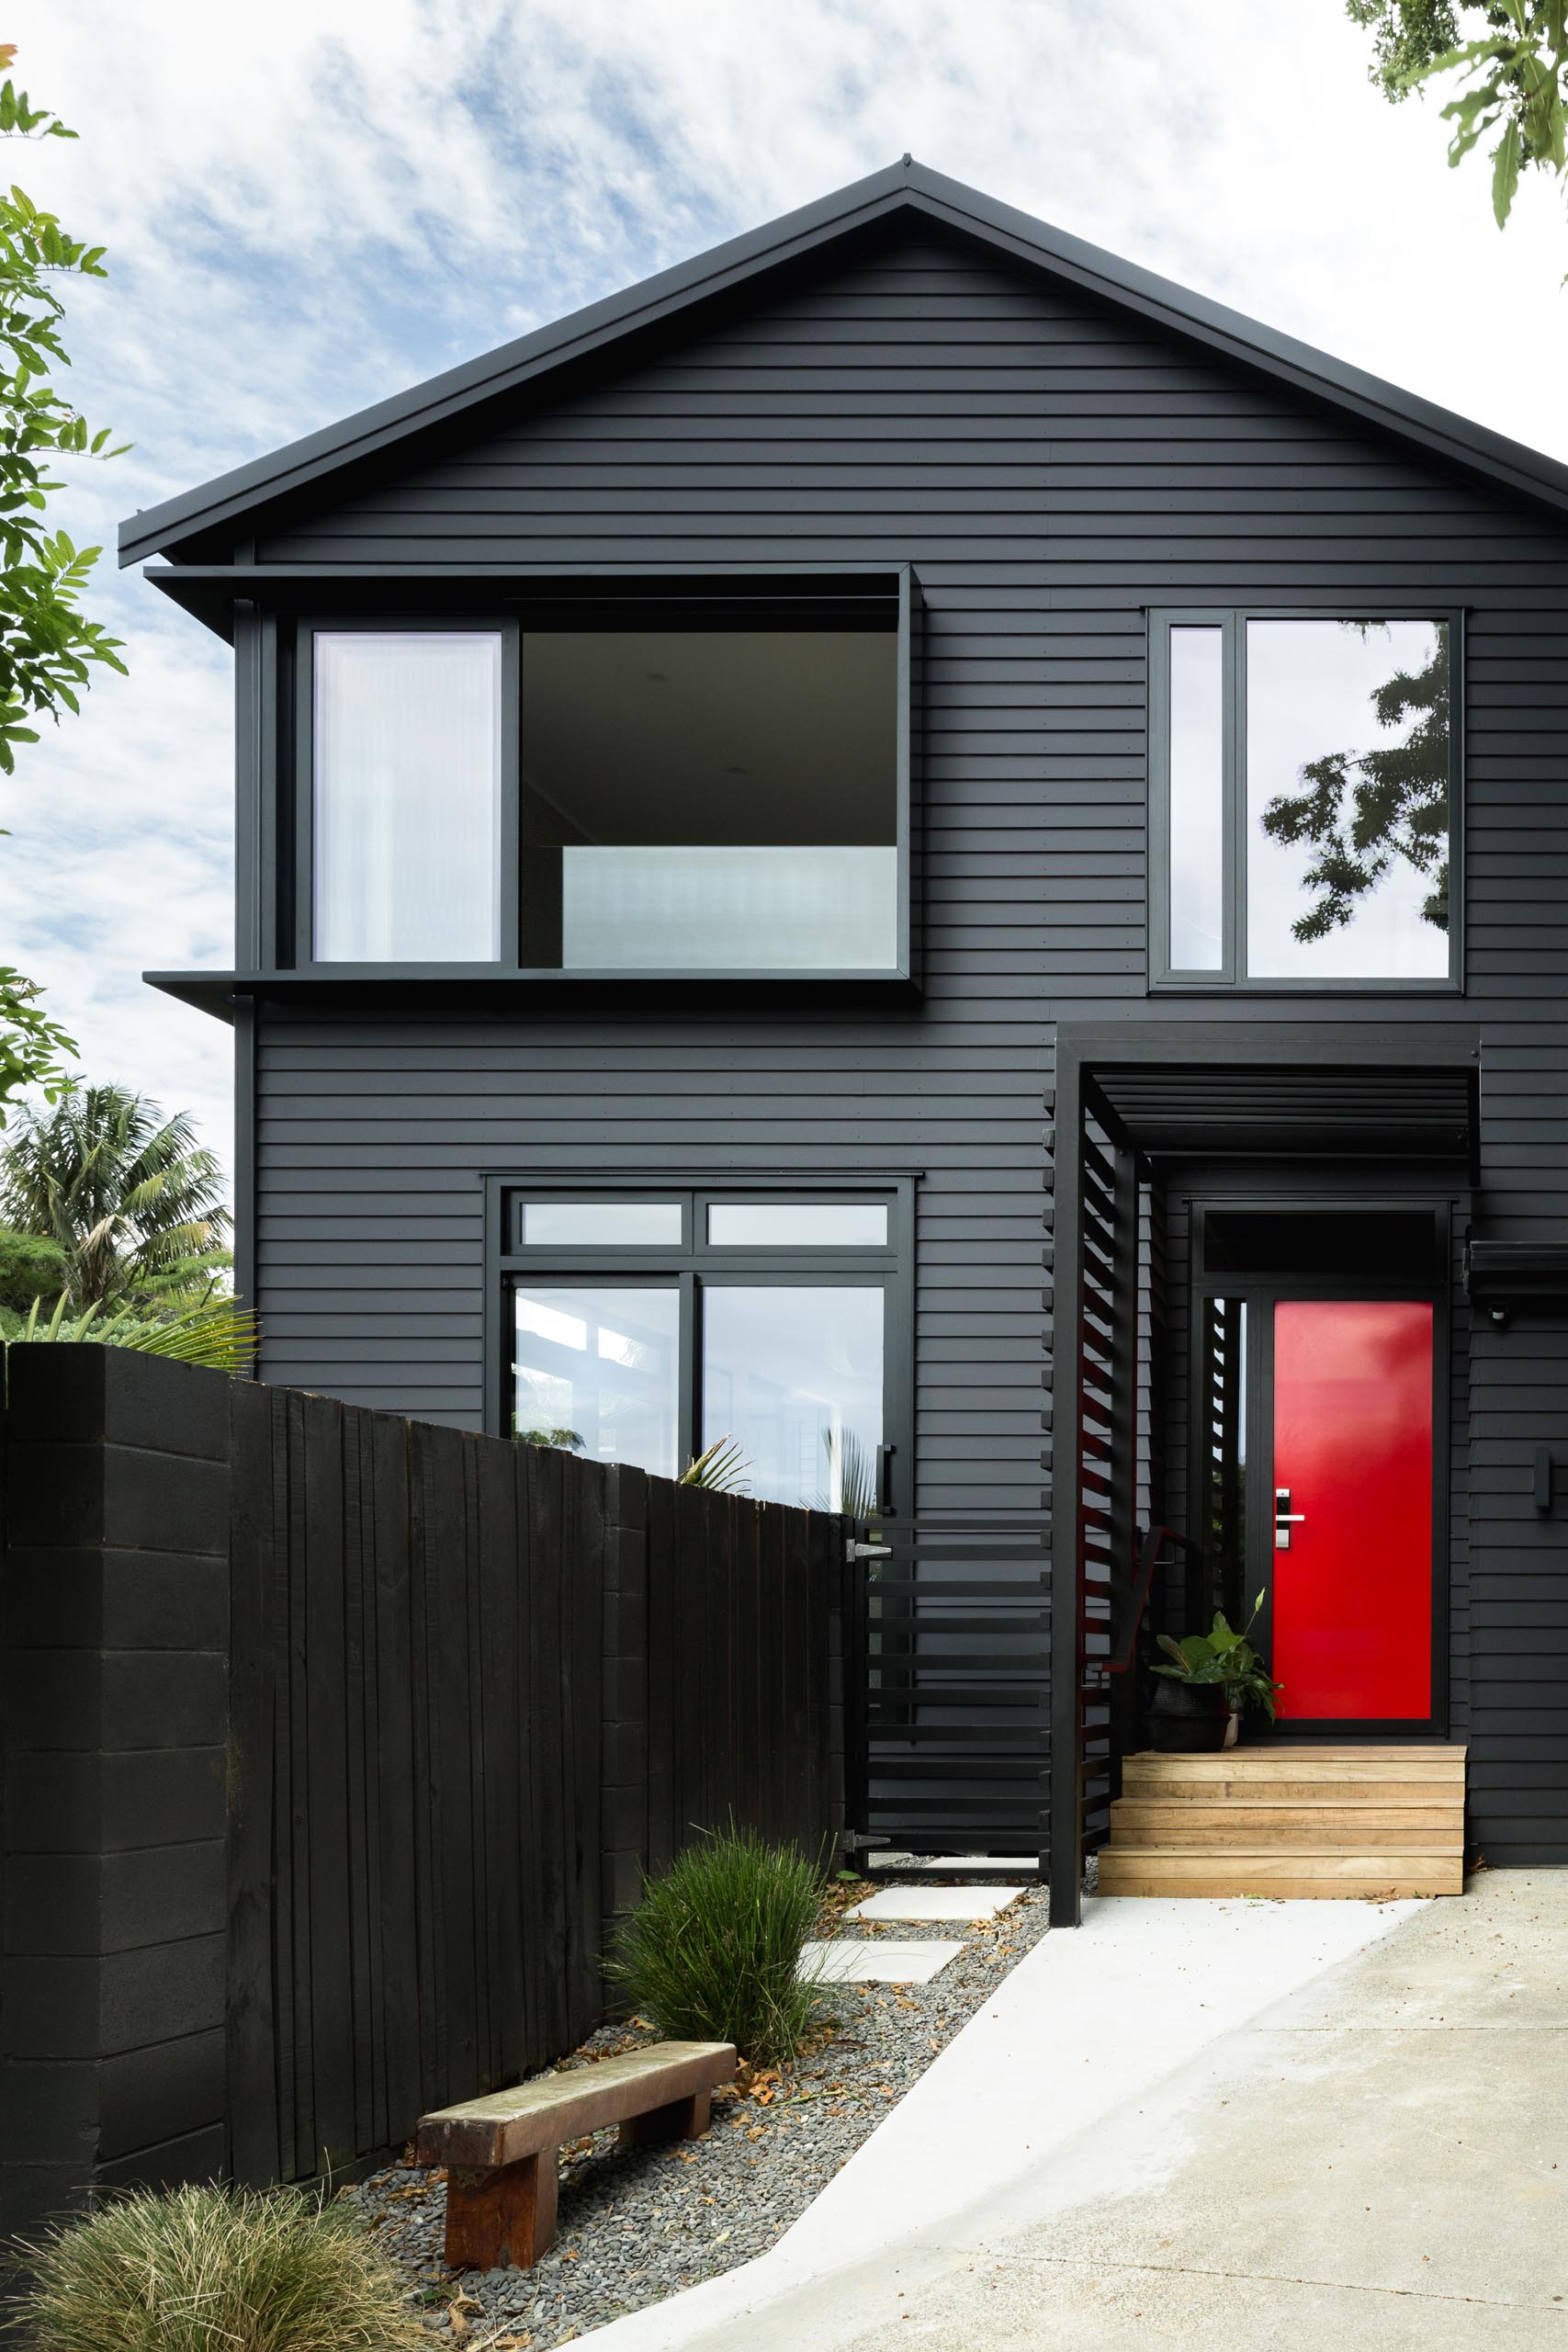 The Black Exterior Of This Home With A Bold Red Front Door A Light Interior